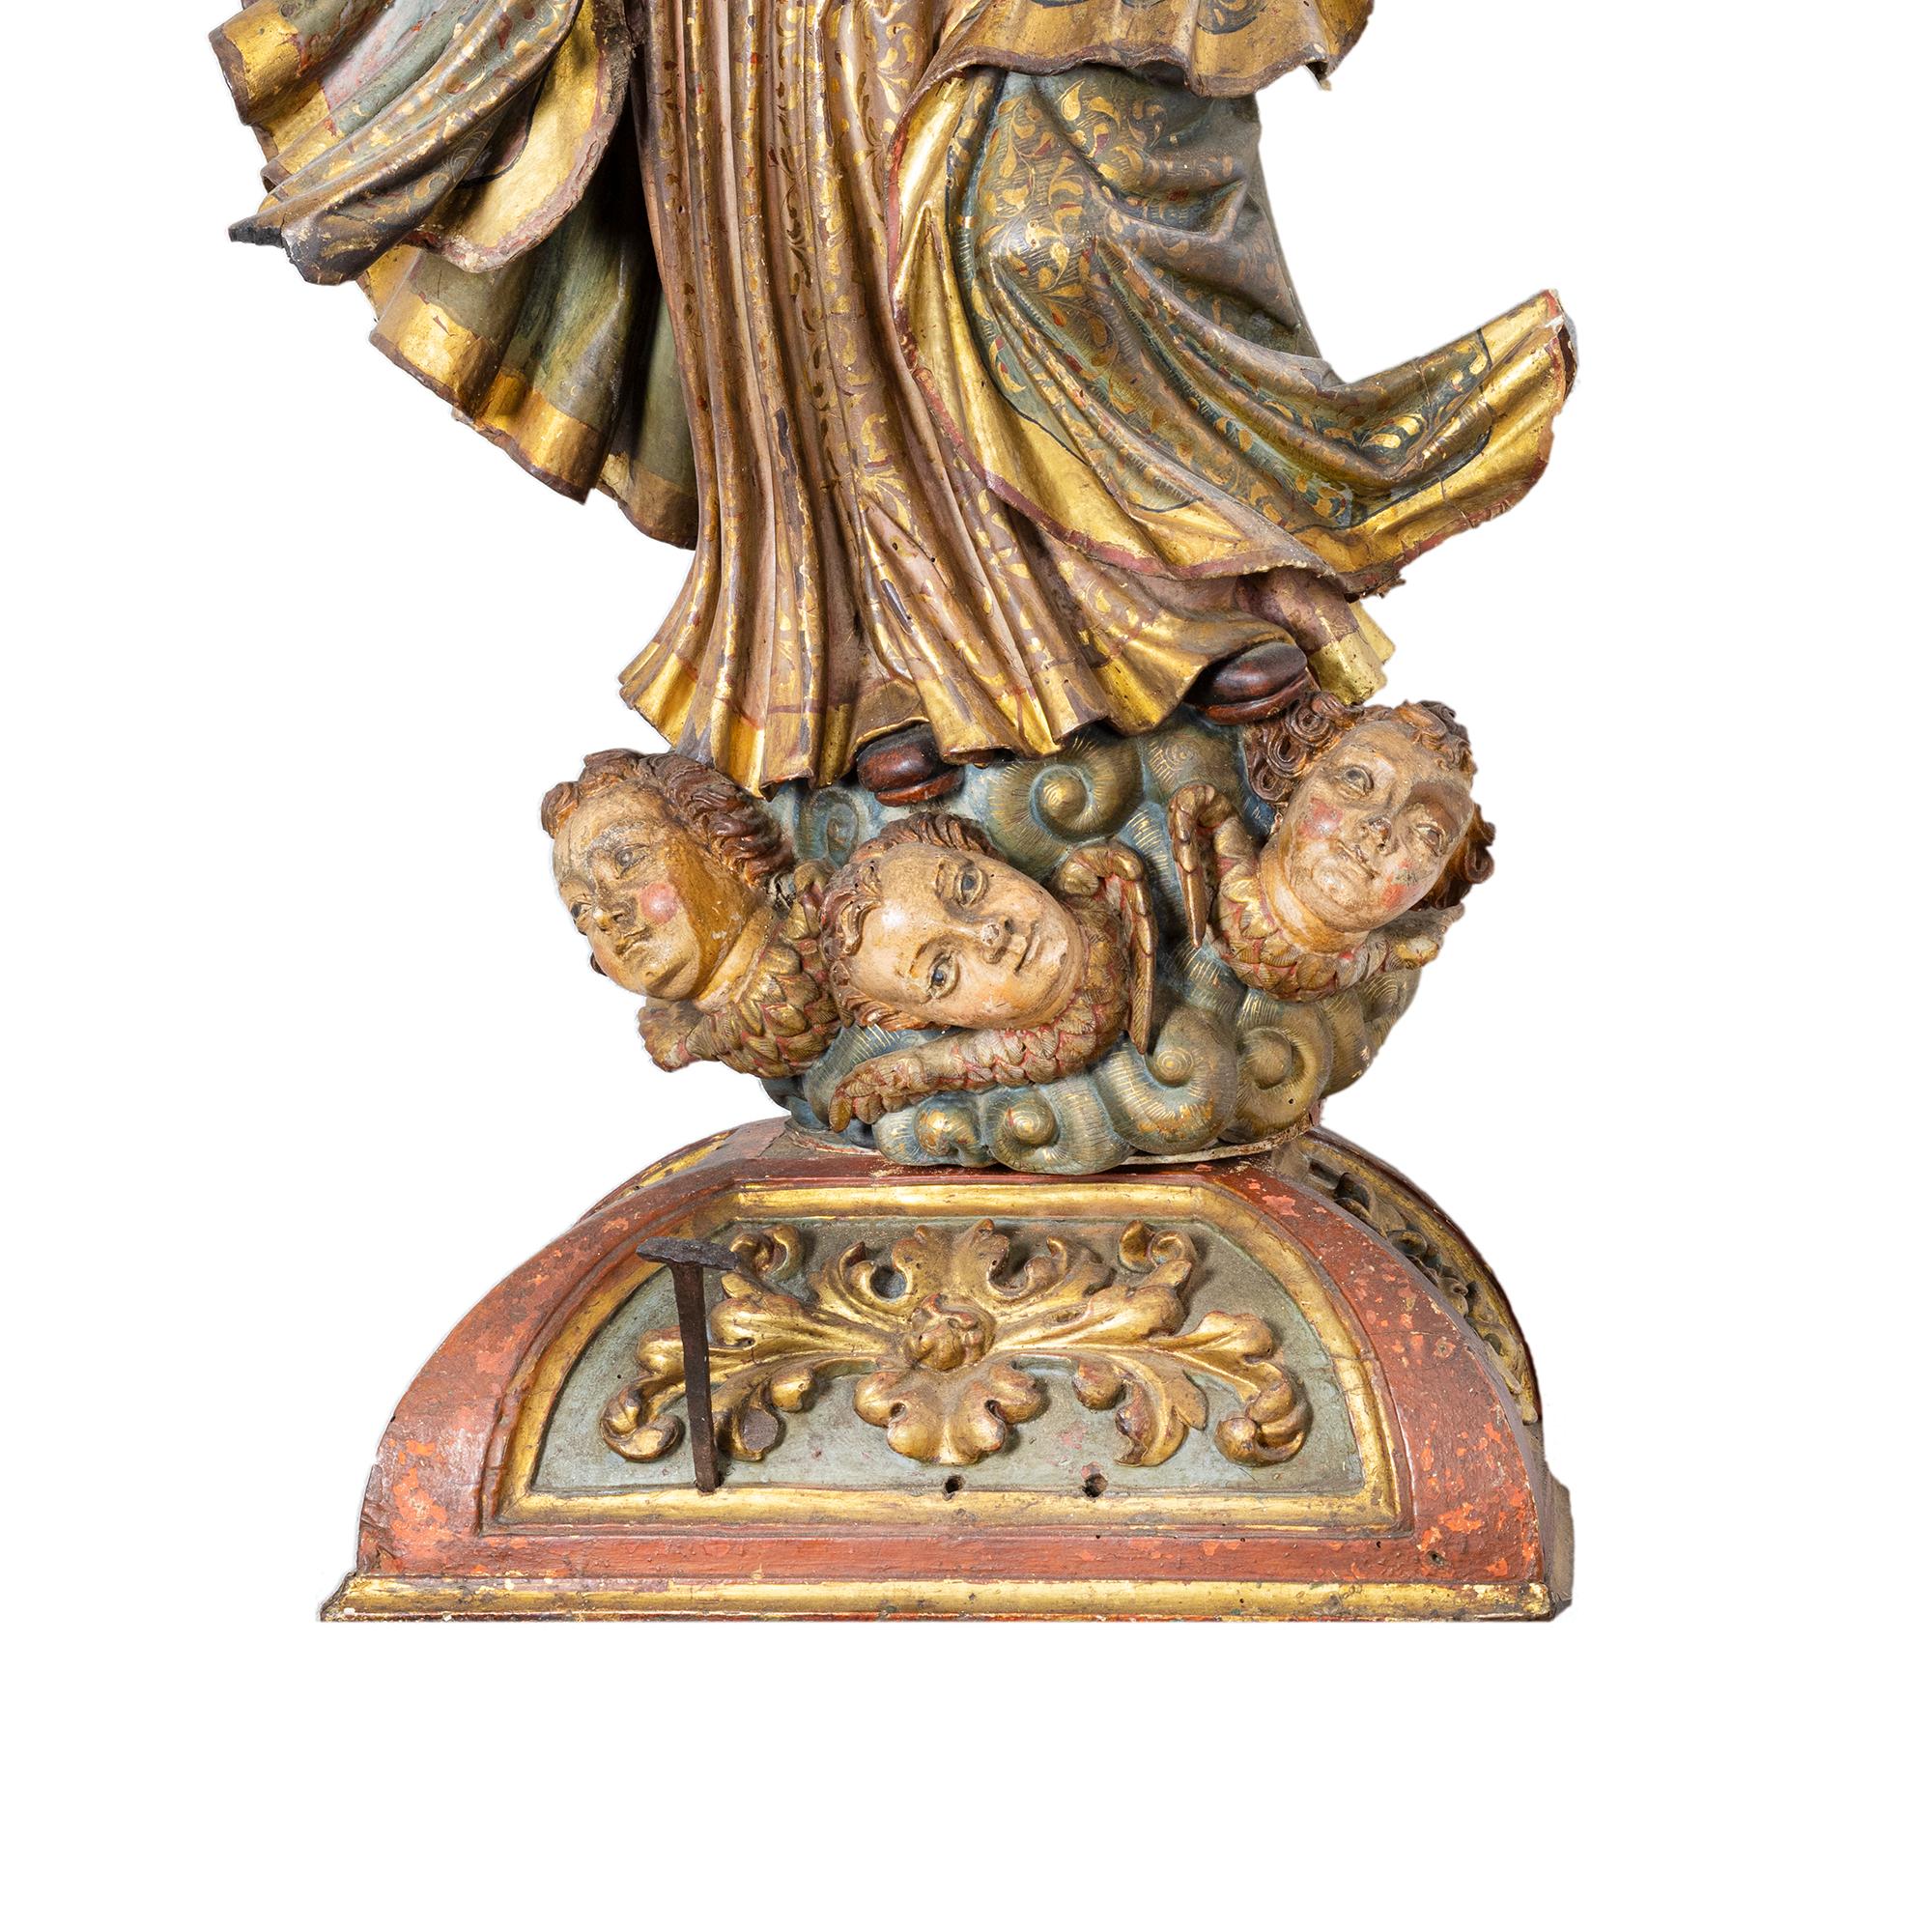 Spanish Immaculate Conception Baroque Sculpture, 18th Century  - Religious Art For Sale